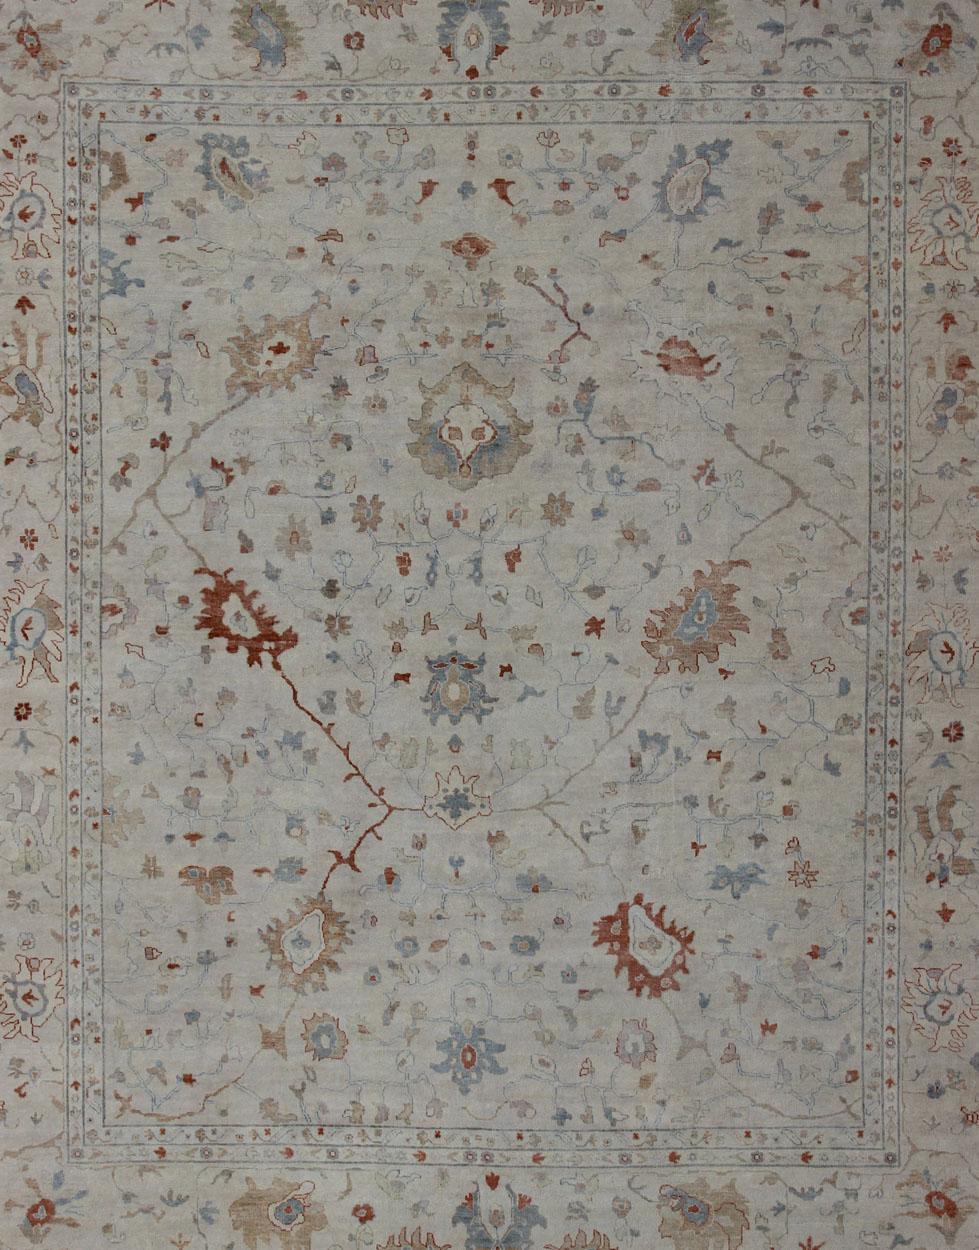 Oushak rug with blue and coral, neutral color palette and all-over flower design, Keivan Woven Arts / rug BDH-742865, country of origin / type: India/ Oushak

This hand knotted Oushak rug features a beautiful design rendered in blue and coral and